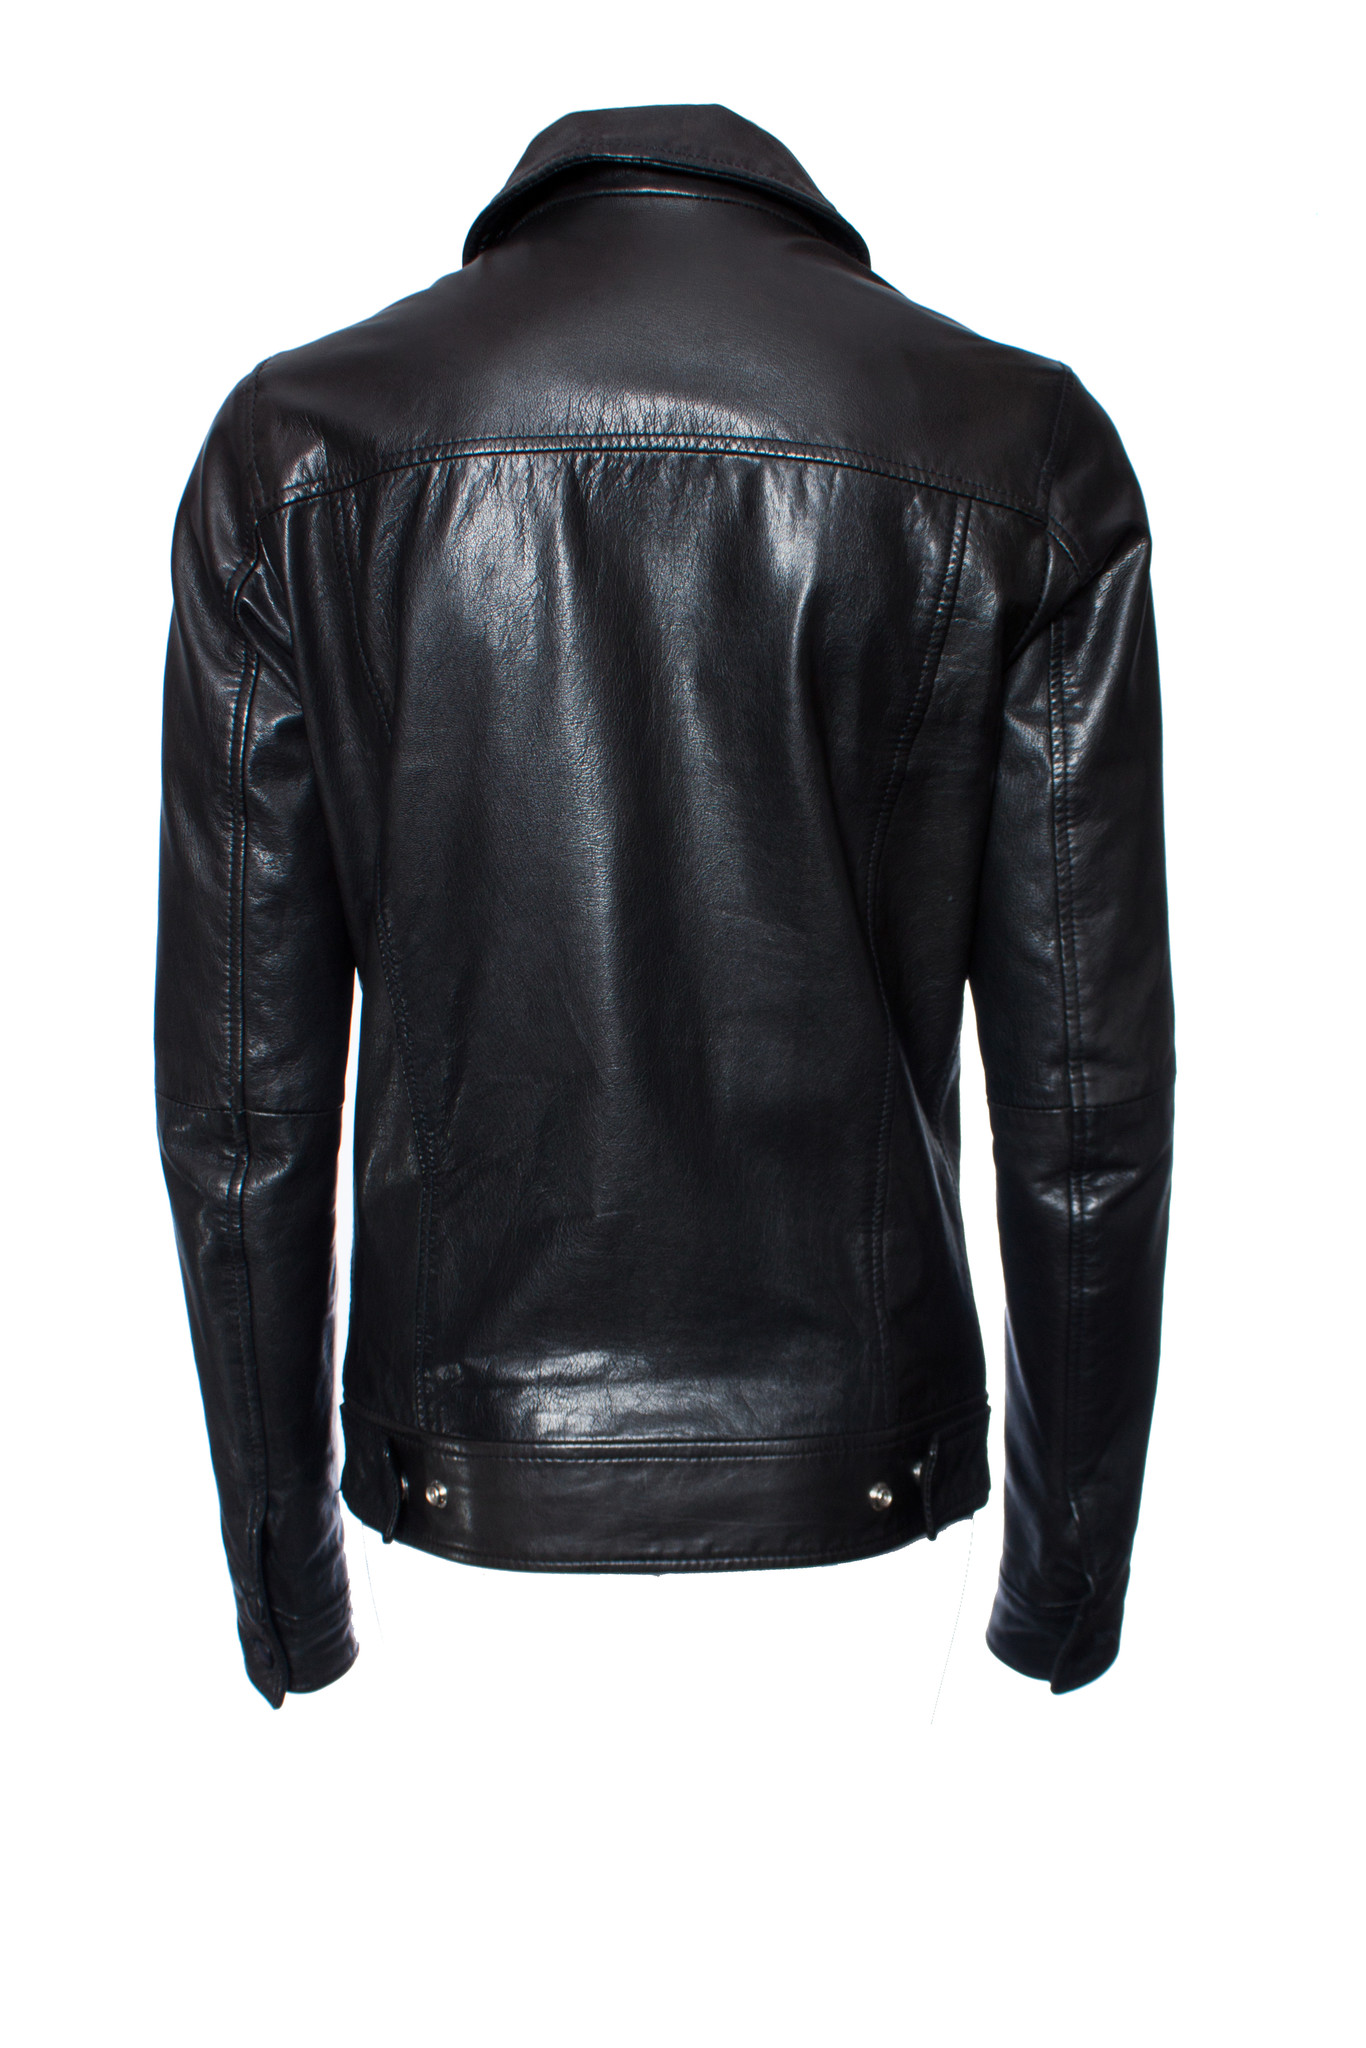 G star Raw, Black leather jacket in size S. - Unique Designer Pieces